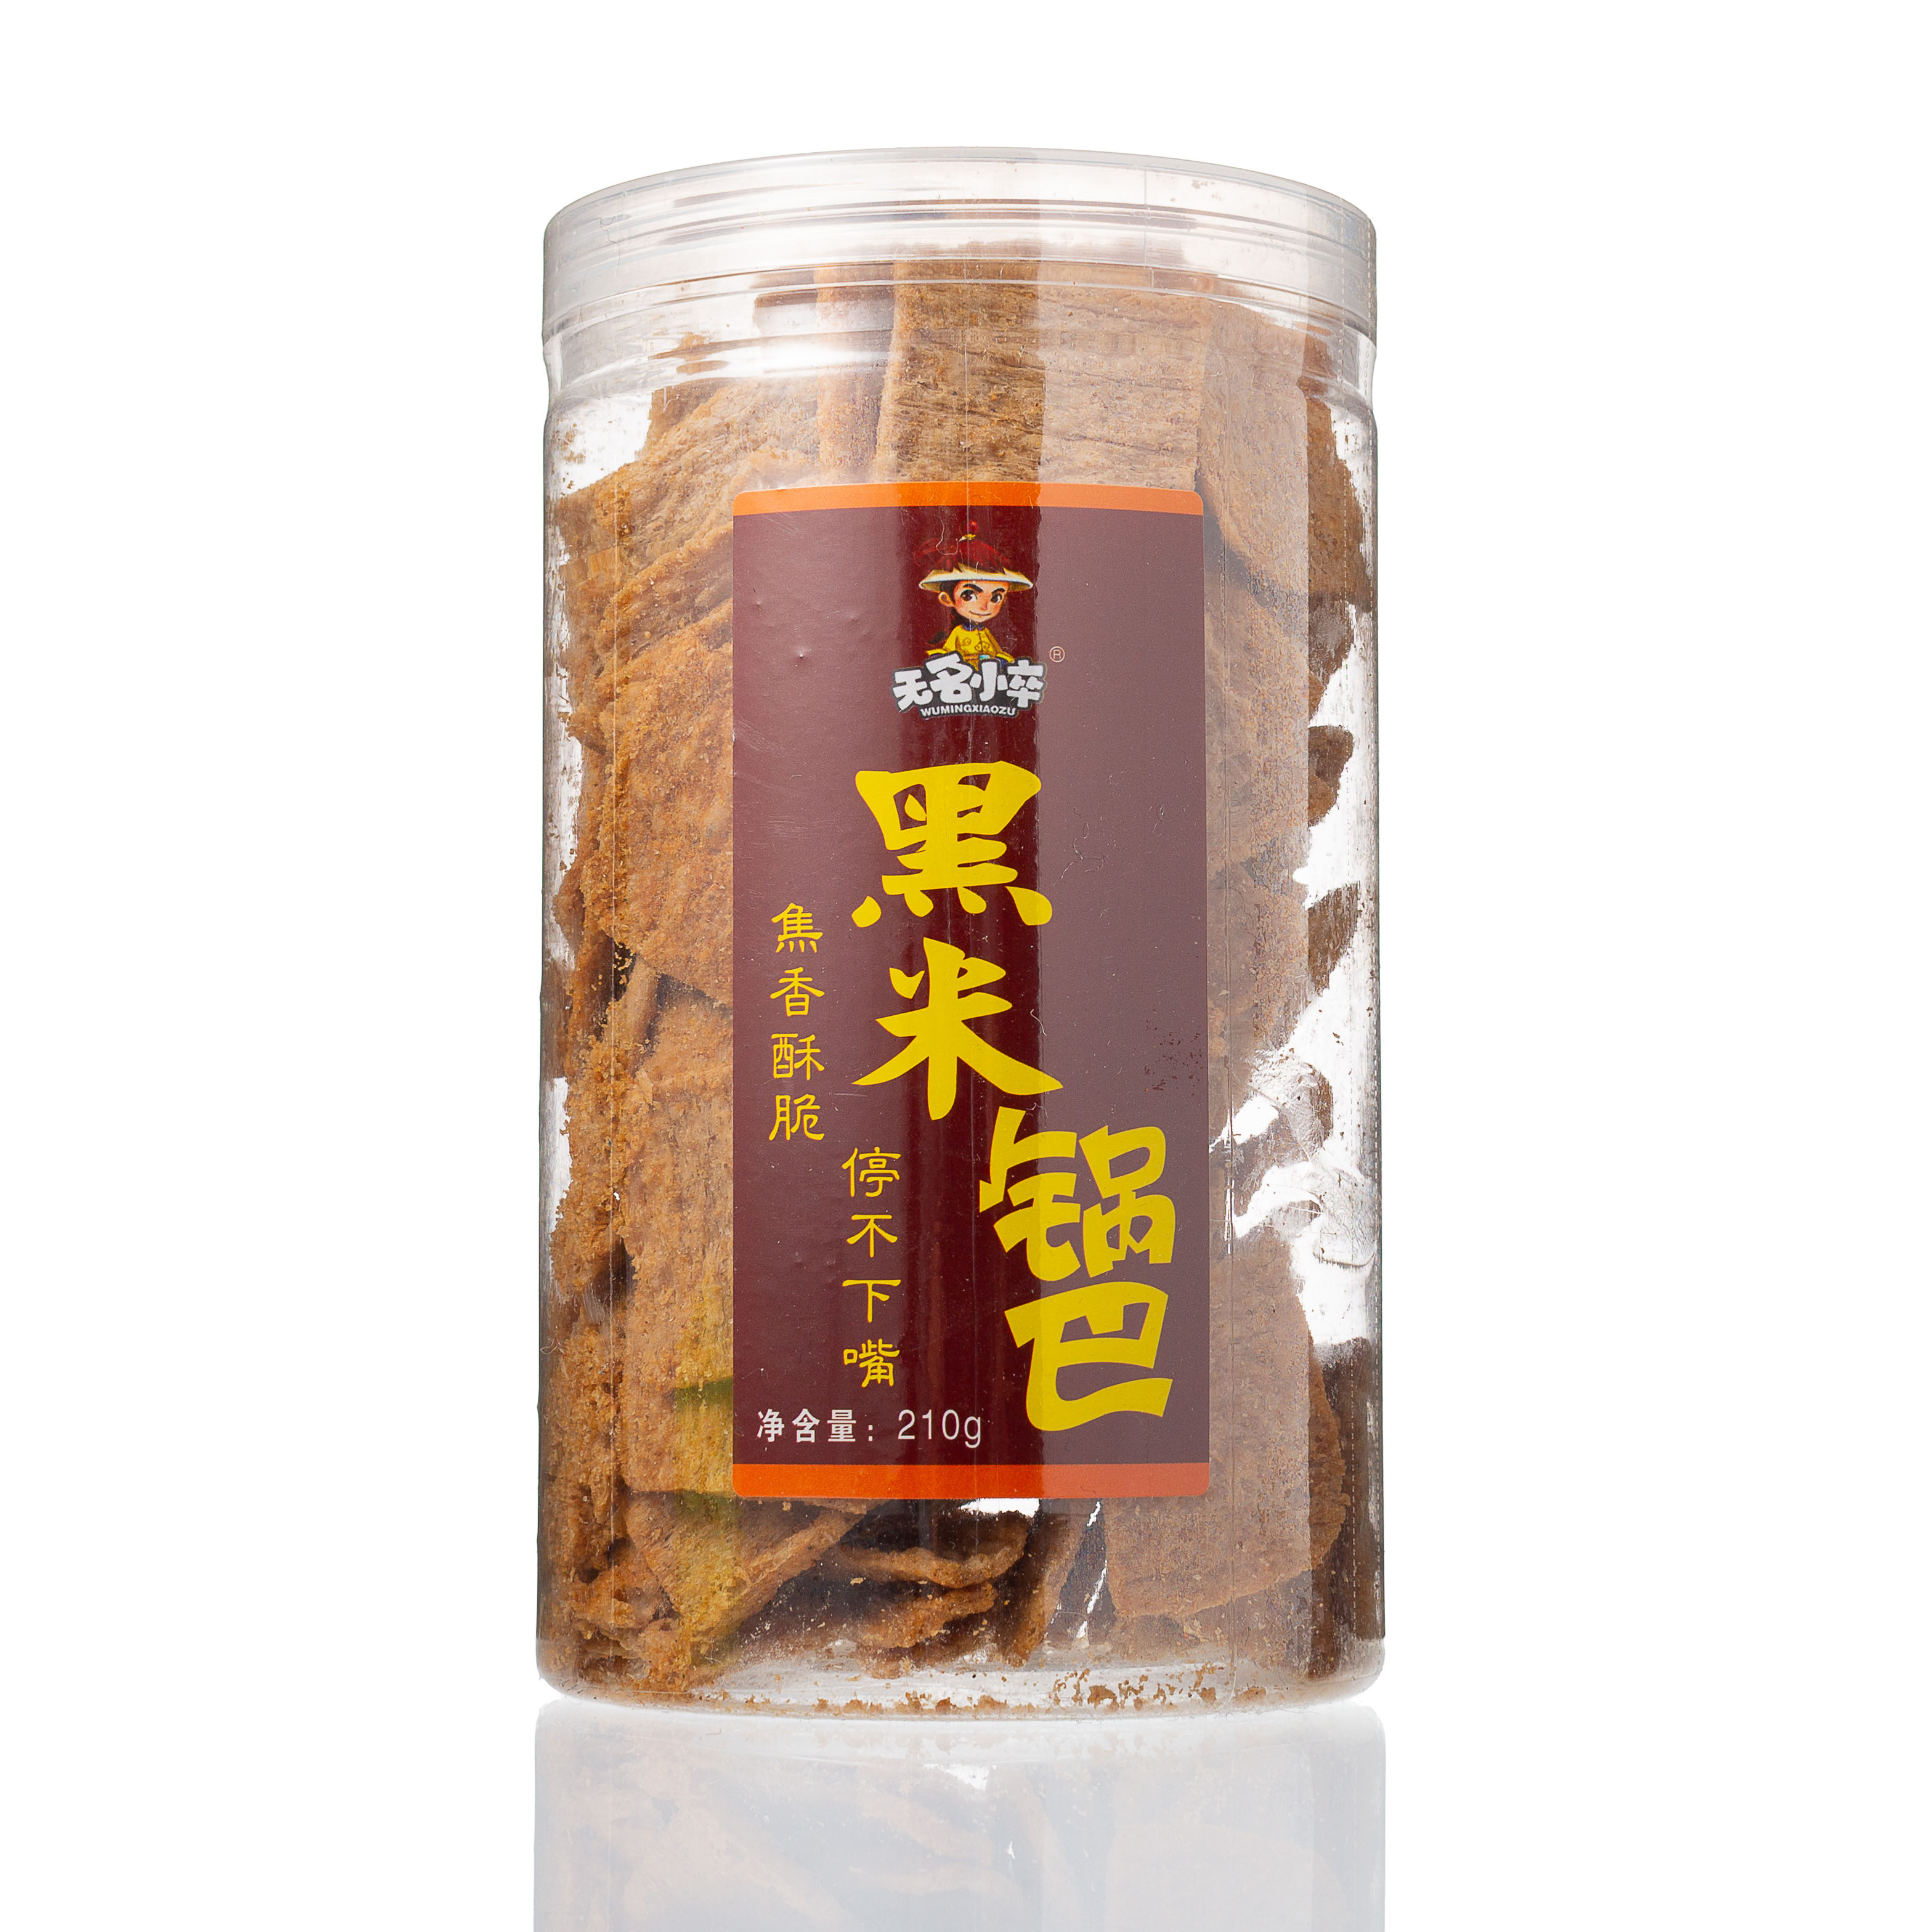 WuMingXiaoZu Crispy Rice Cracker Black Rice Original Flavour 210g-eBest-Nuts & Dried Fruit,Snacks & Confectionery